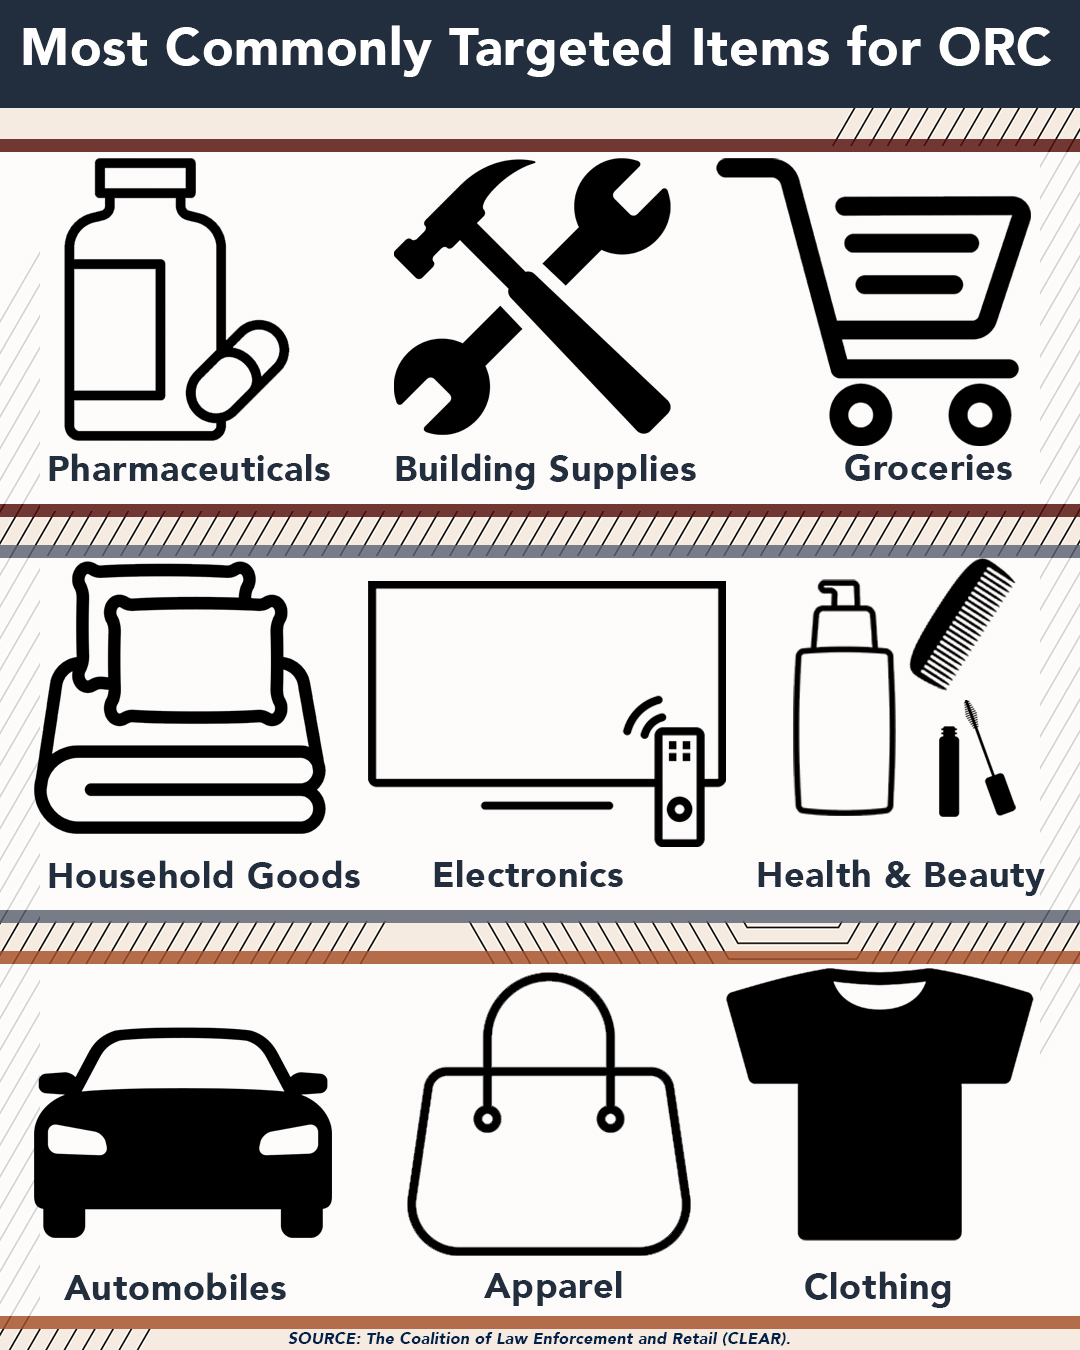 Most commonly targeted items for ORC: Pharmaceuticals, building supplies, groceries, household goods, electronics, health and beauty, automobiles, apparel, clothing. Source: The Coalition of Law Enforcement and Retail (CLEAR)